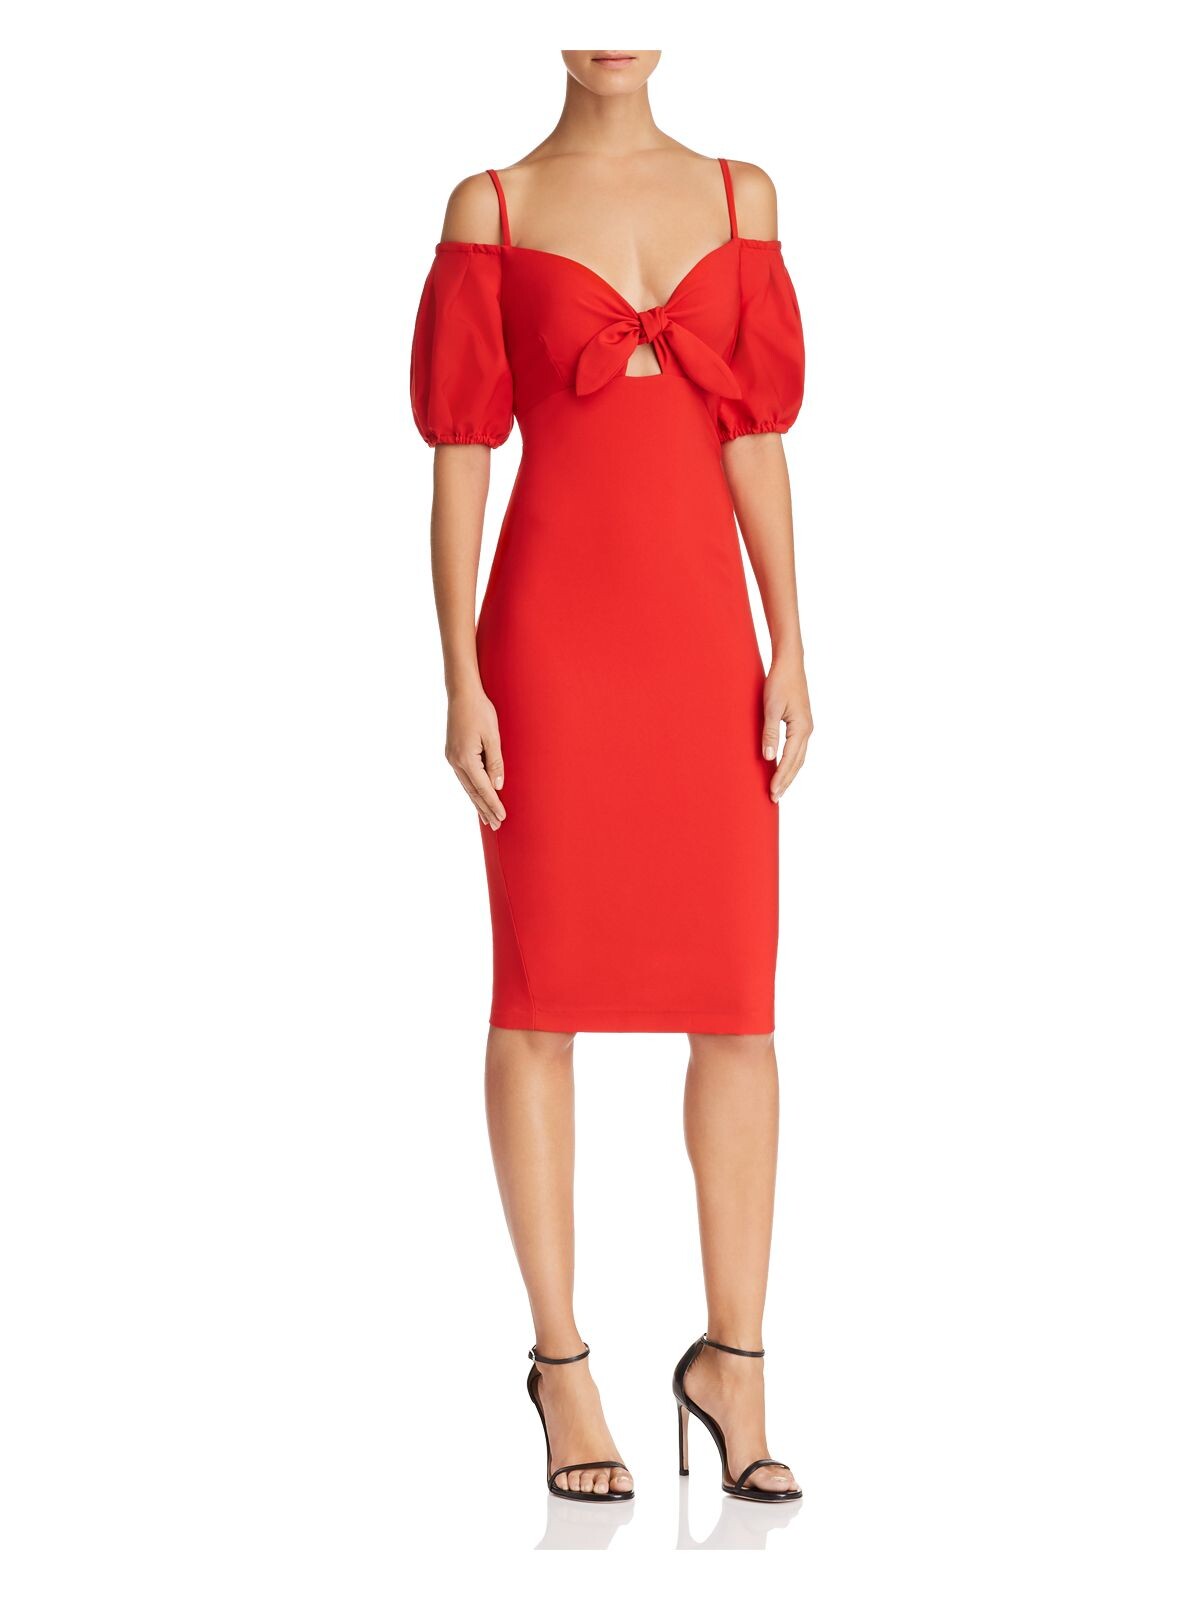 NOOKIE Womens Red Cold Shoulder  Bow Front Spaghetti Strap Off Shoulder Knee Length Cocktail Body Con Dress XS